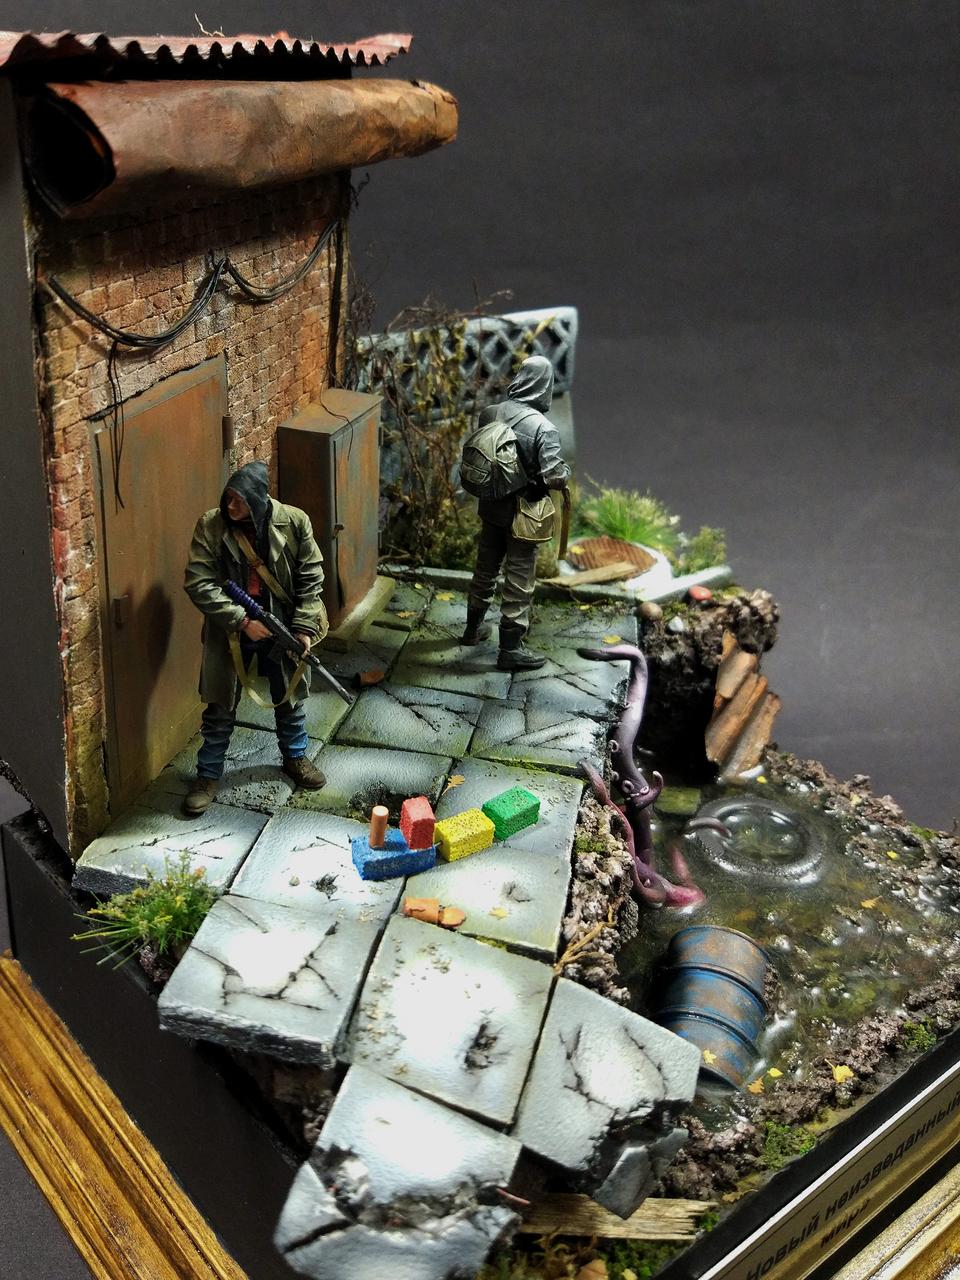 Dioramas and Vignettes: New undiscovered world, photo #3